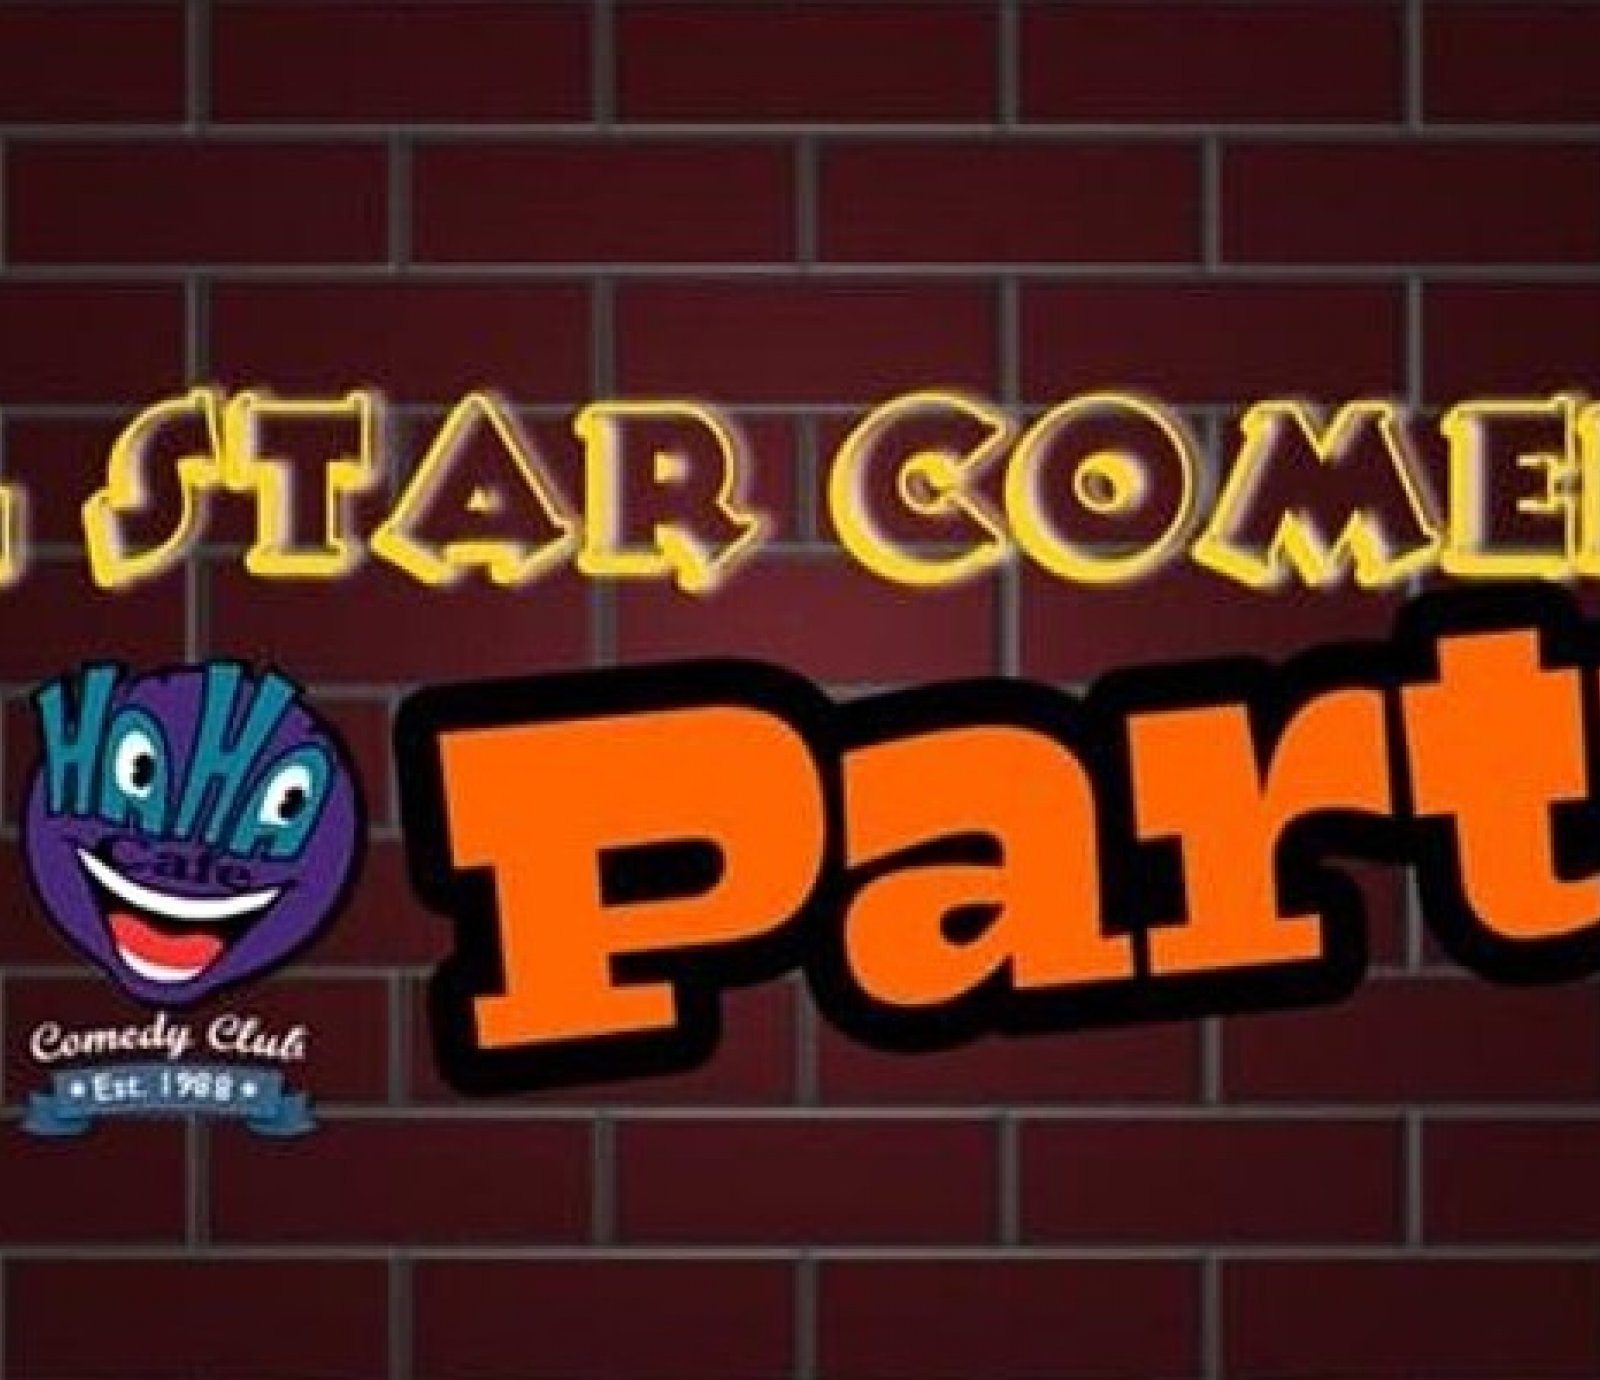 All Star Comedy PARTY